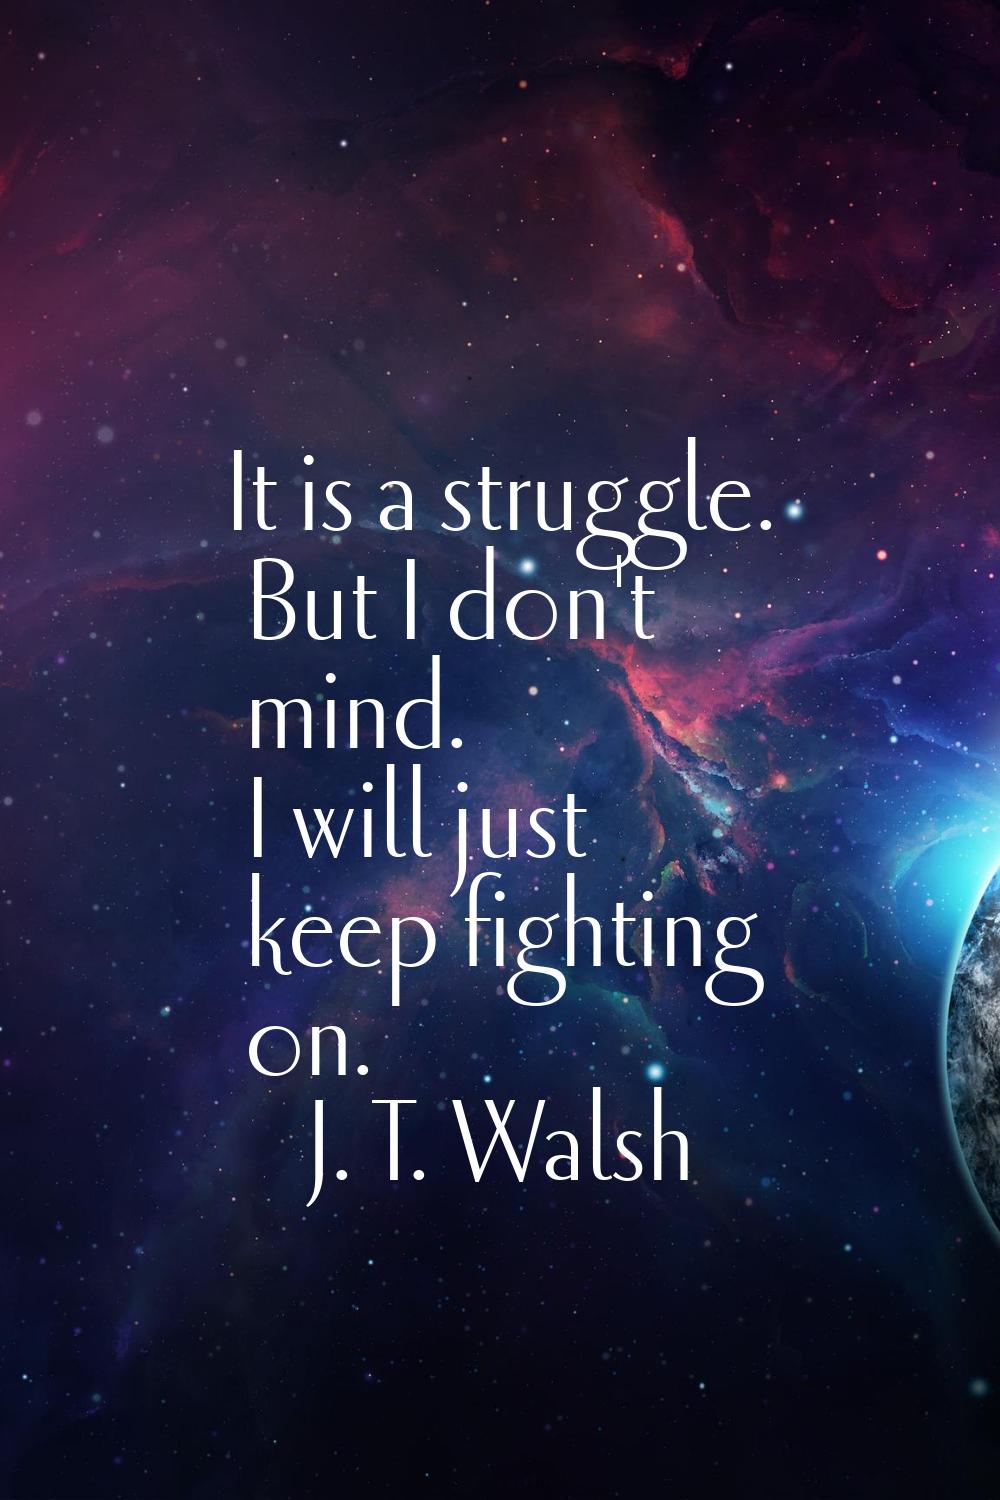 It is a struggle. But I don't mind. I will just keep fighting on.